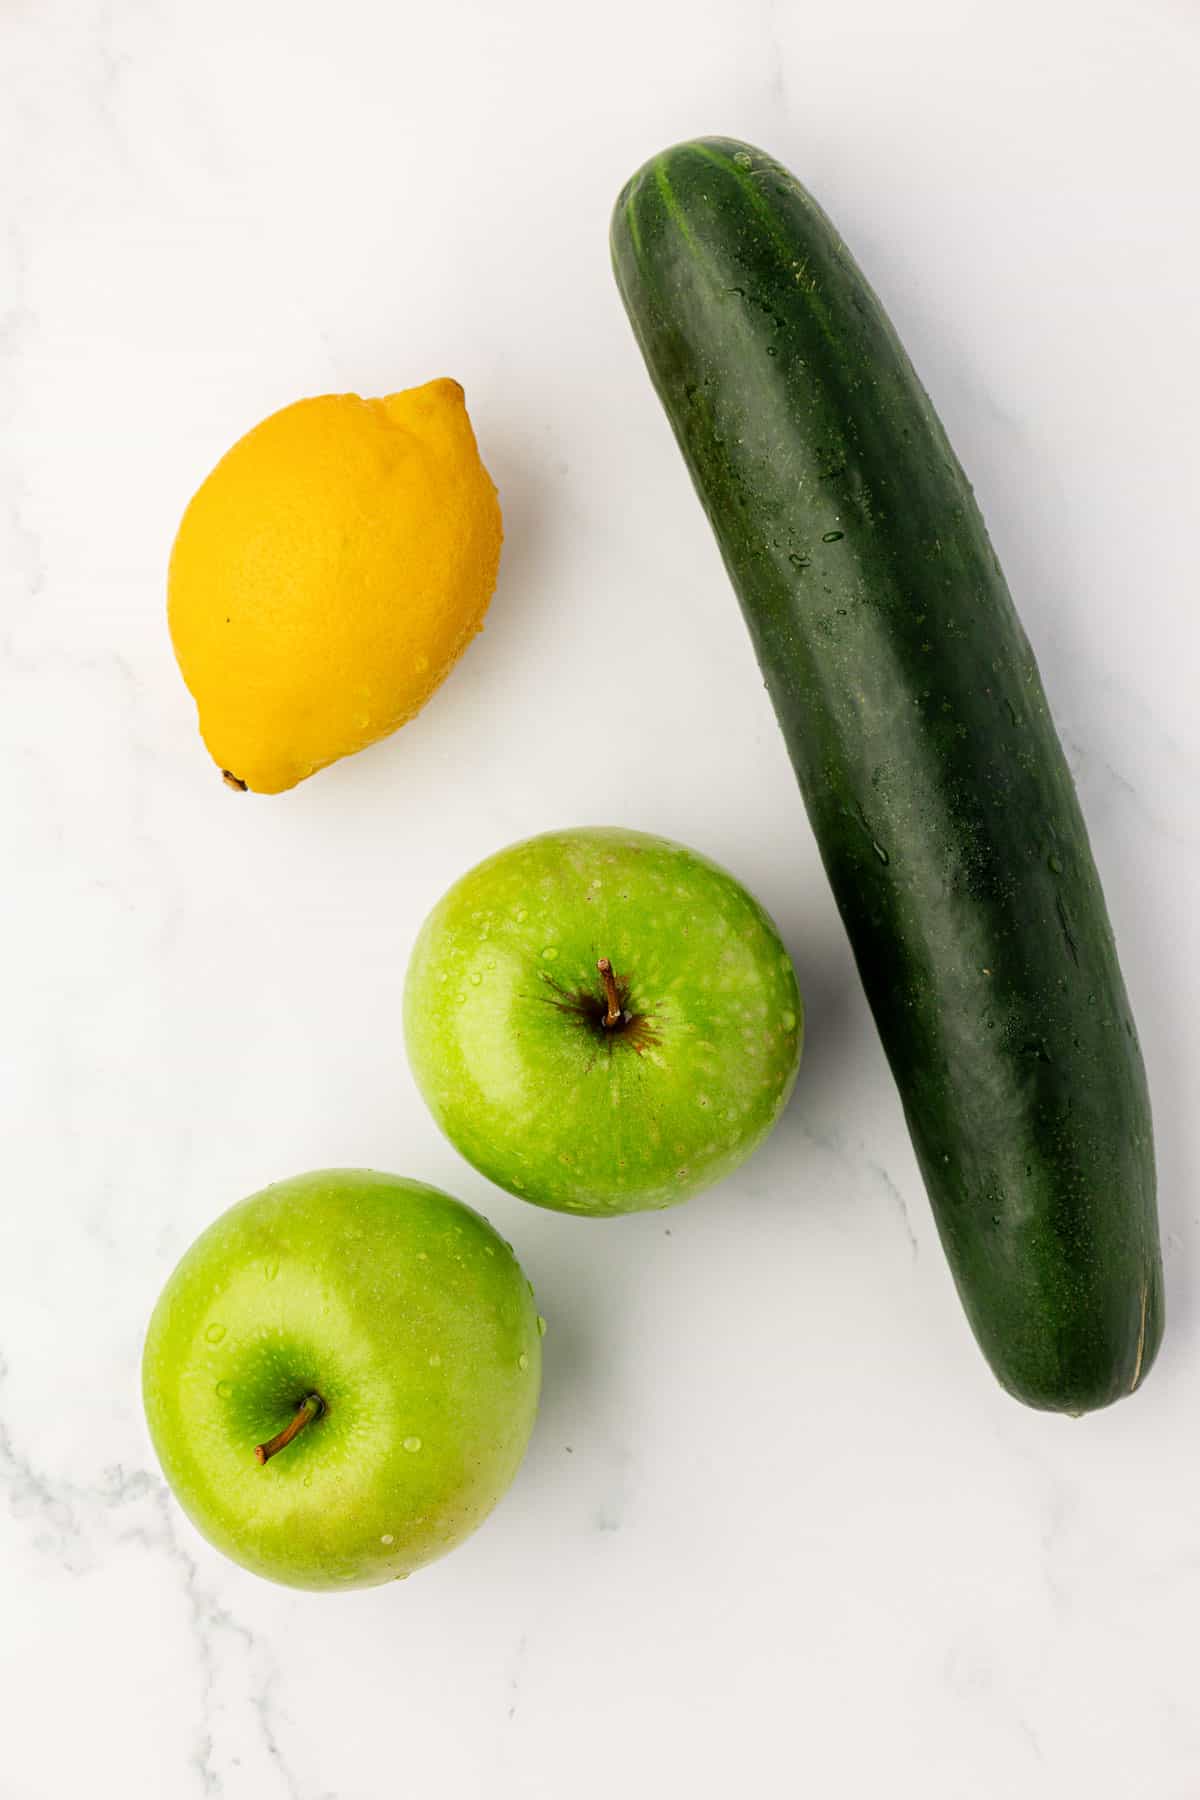 a lemon, two green apples, and a cucumber